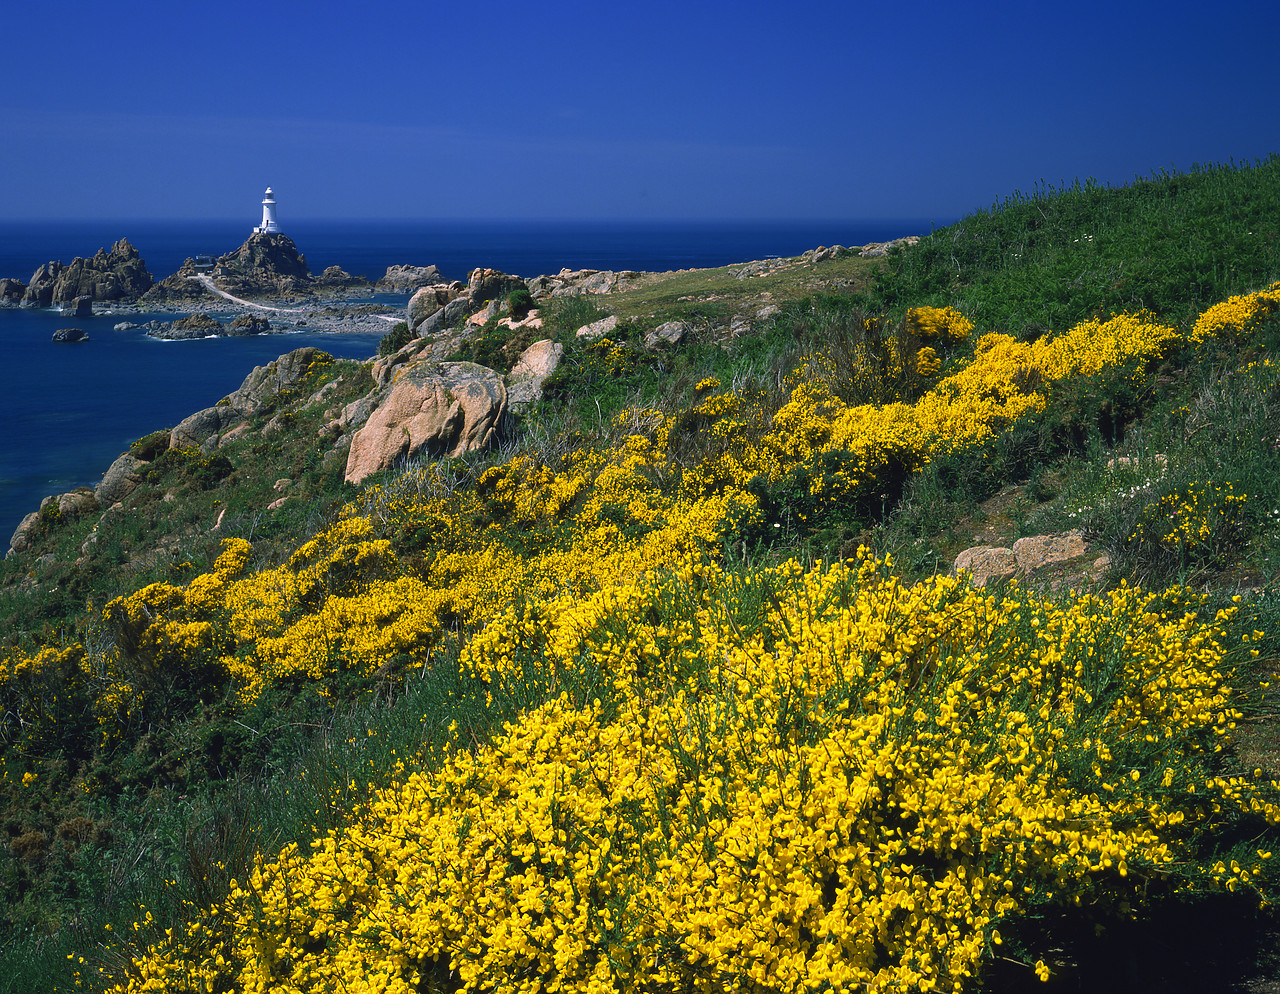 #913493-2 - Gorse Covered Headland, Corbiere Lighthouse, Jersey, Channel Islands